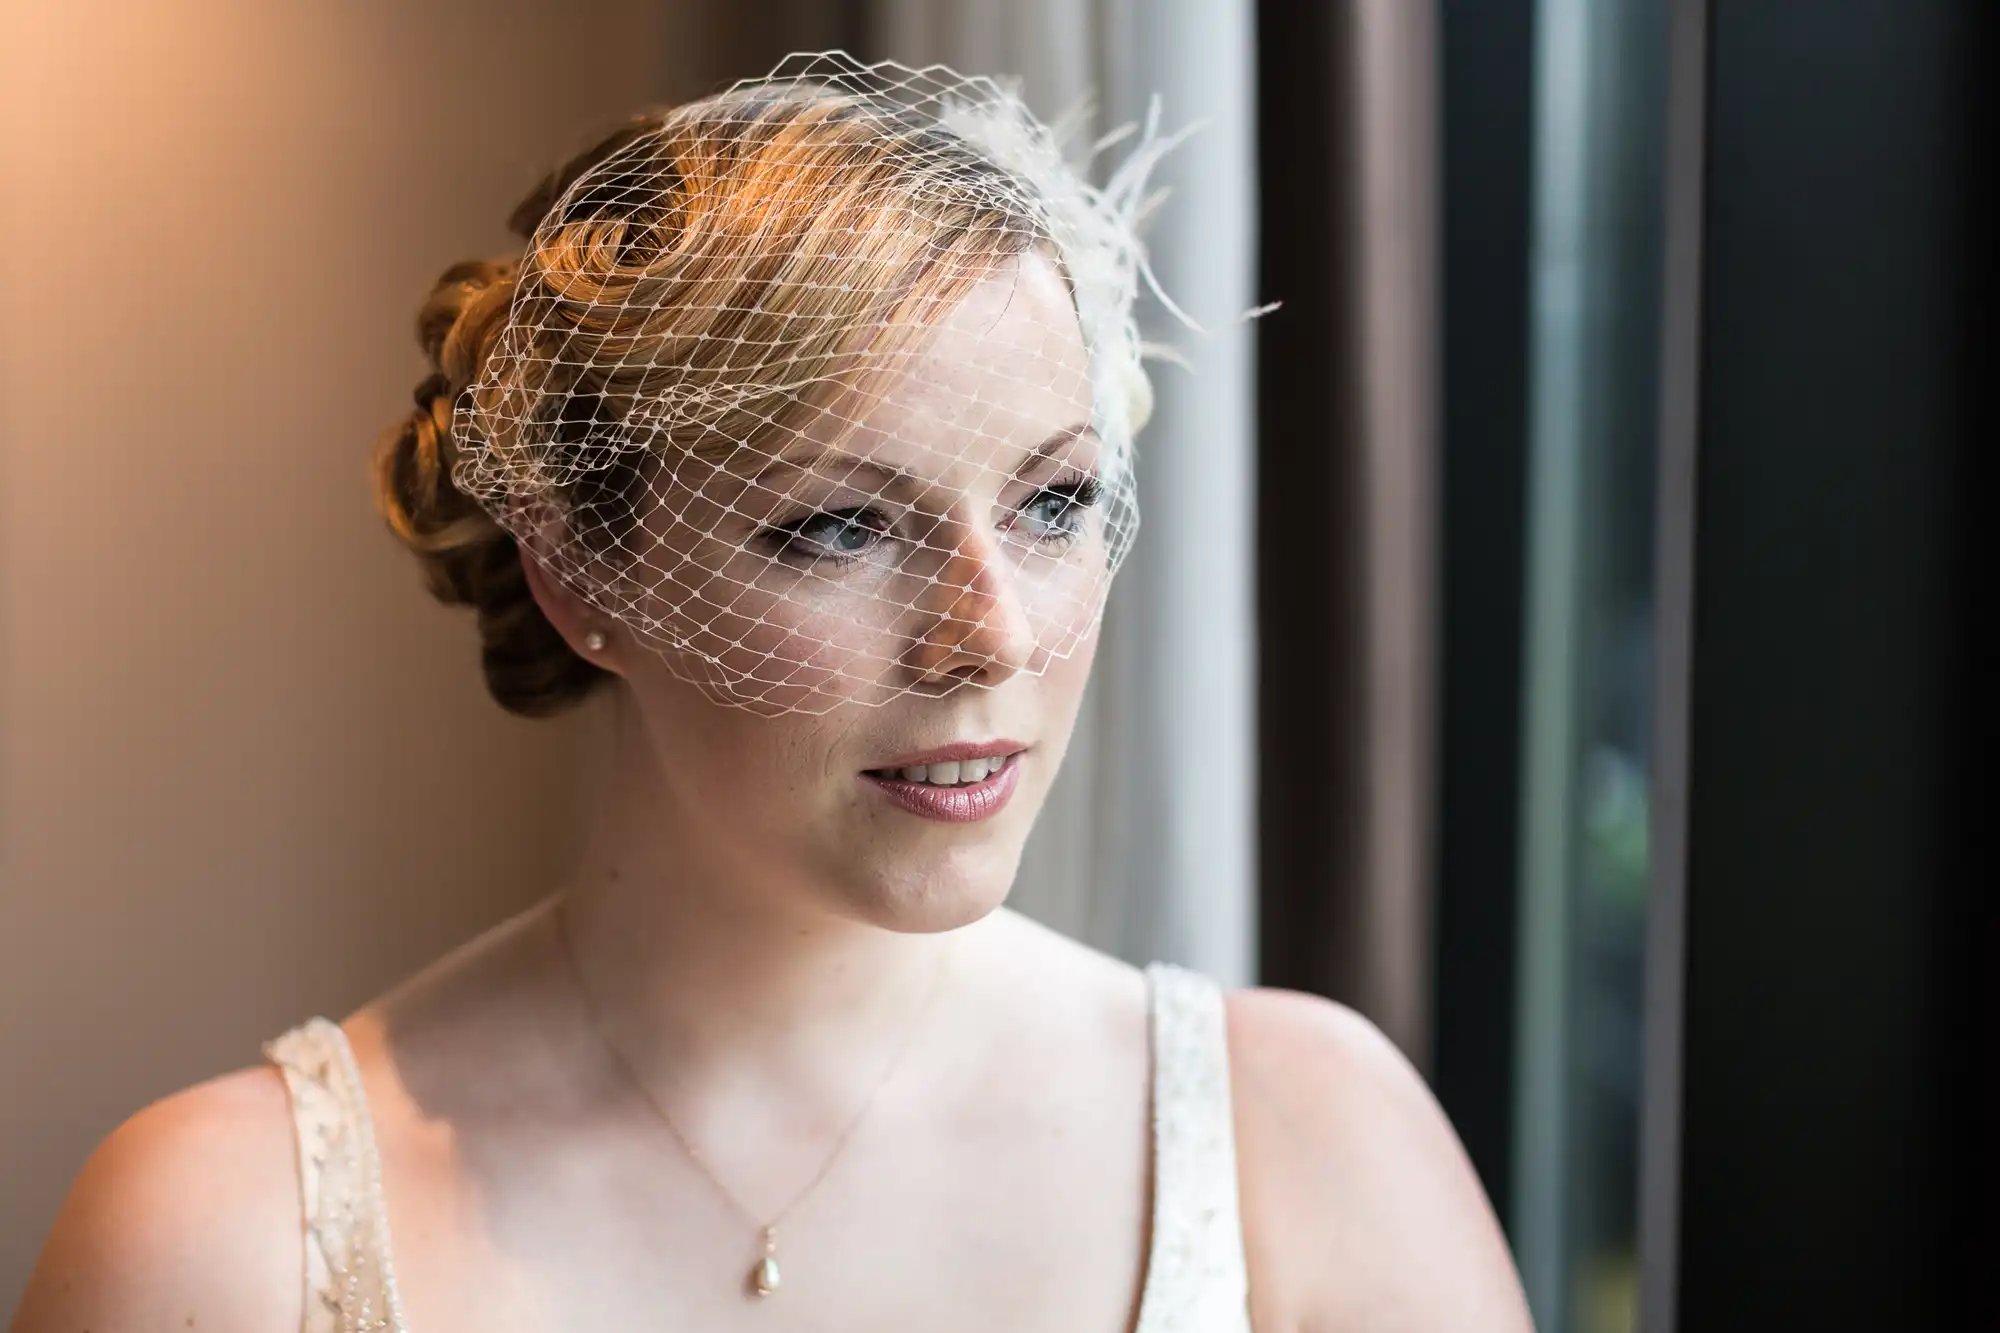 A bride wearing a vintage-inspired birdcage veil looks contemplatively out a window, her hair in an elegant updo.